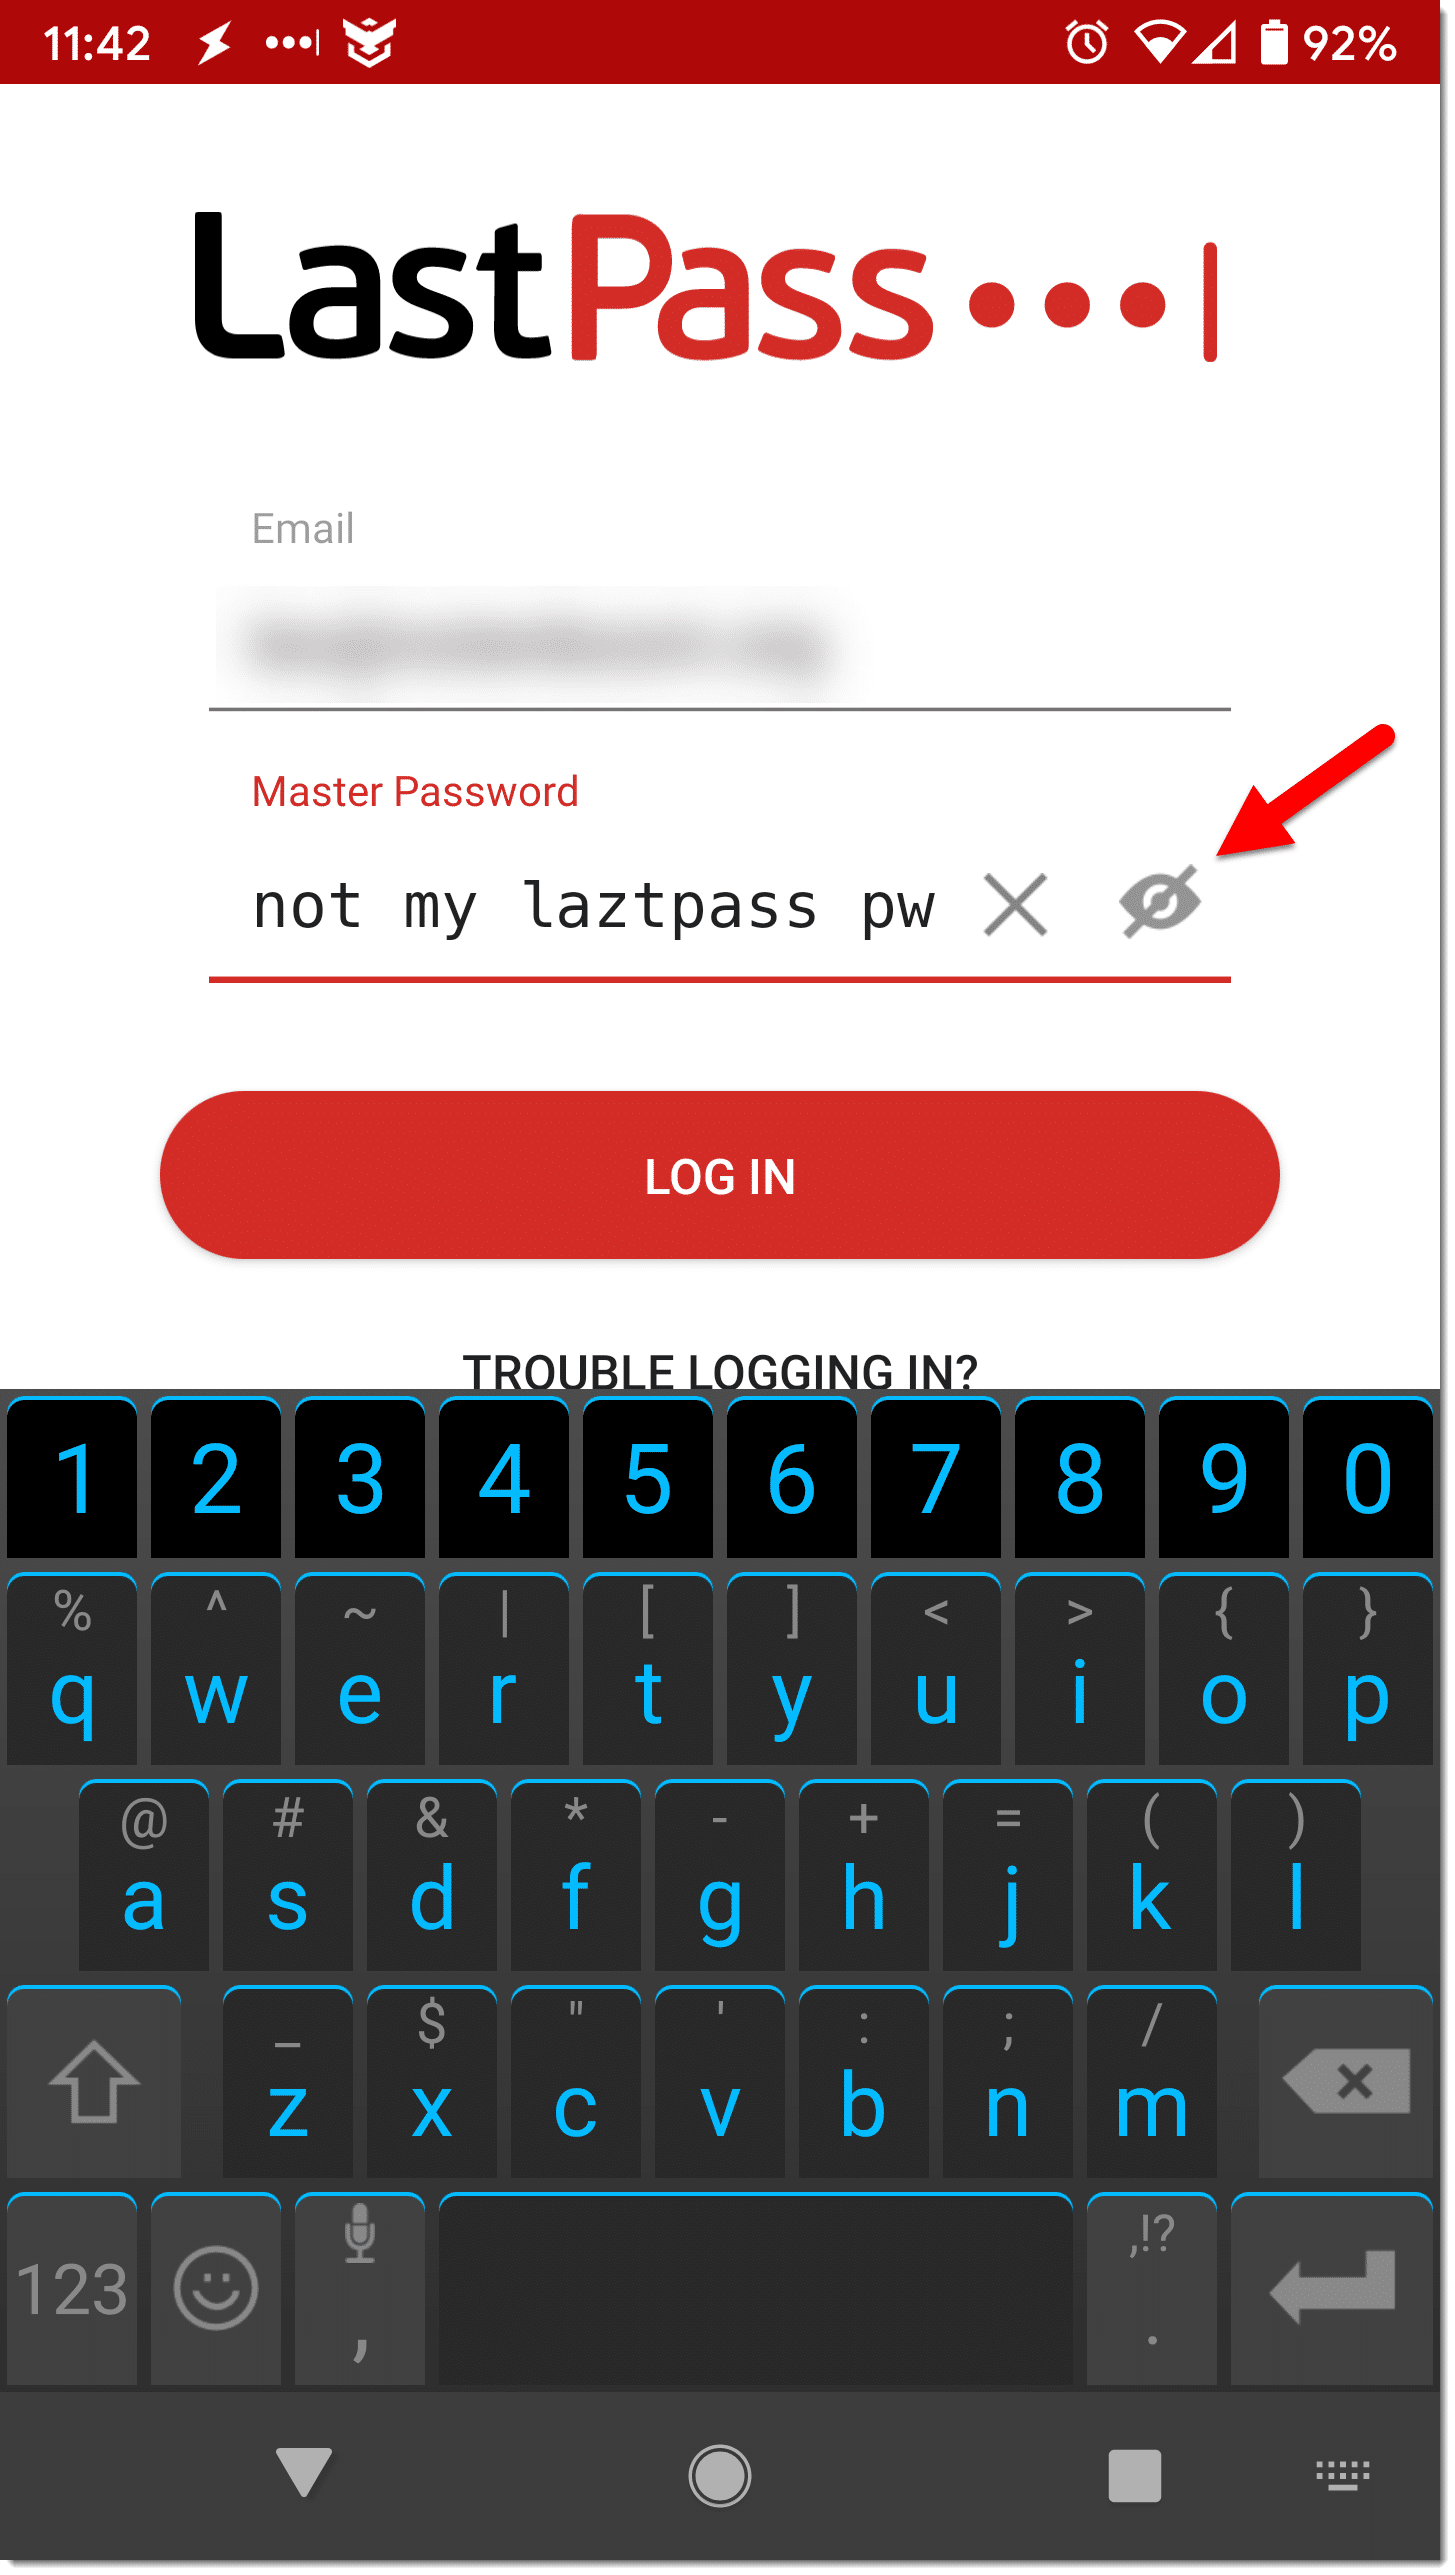 Roblox Sign In Password